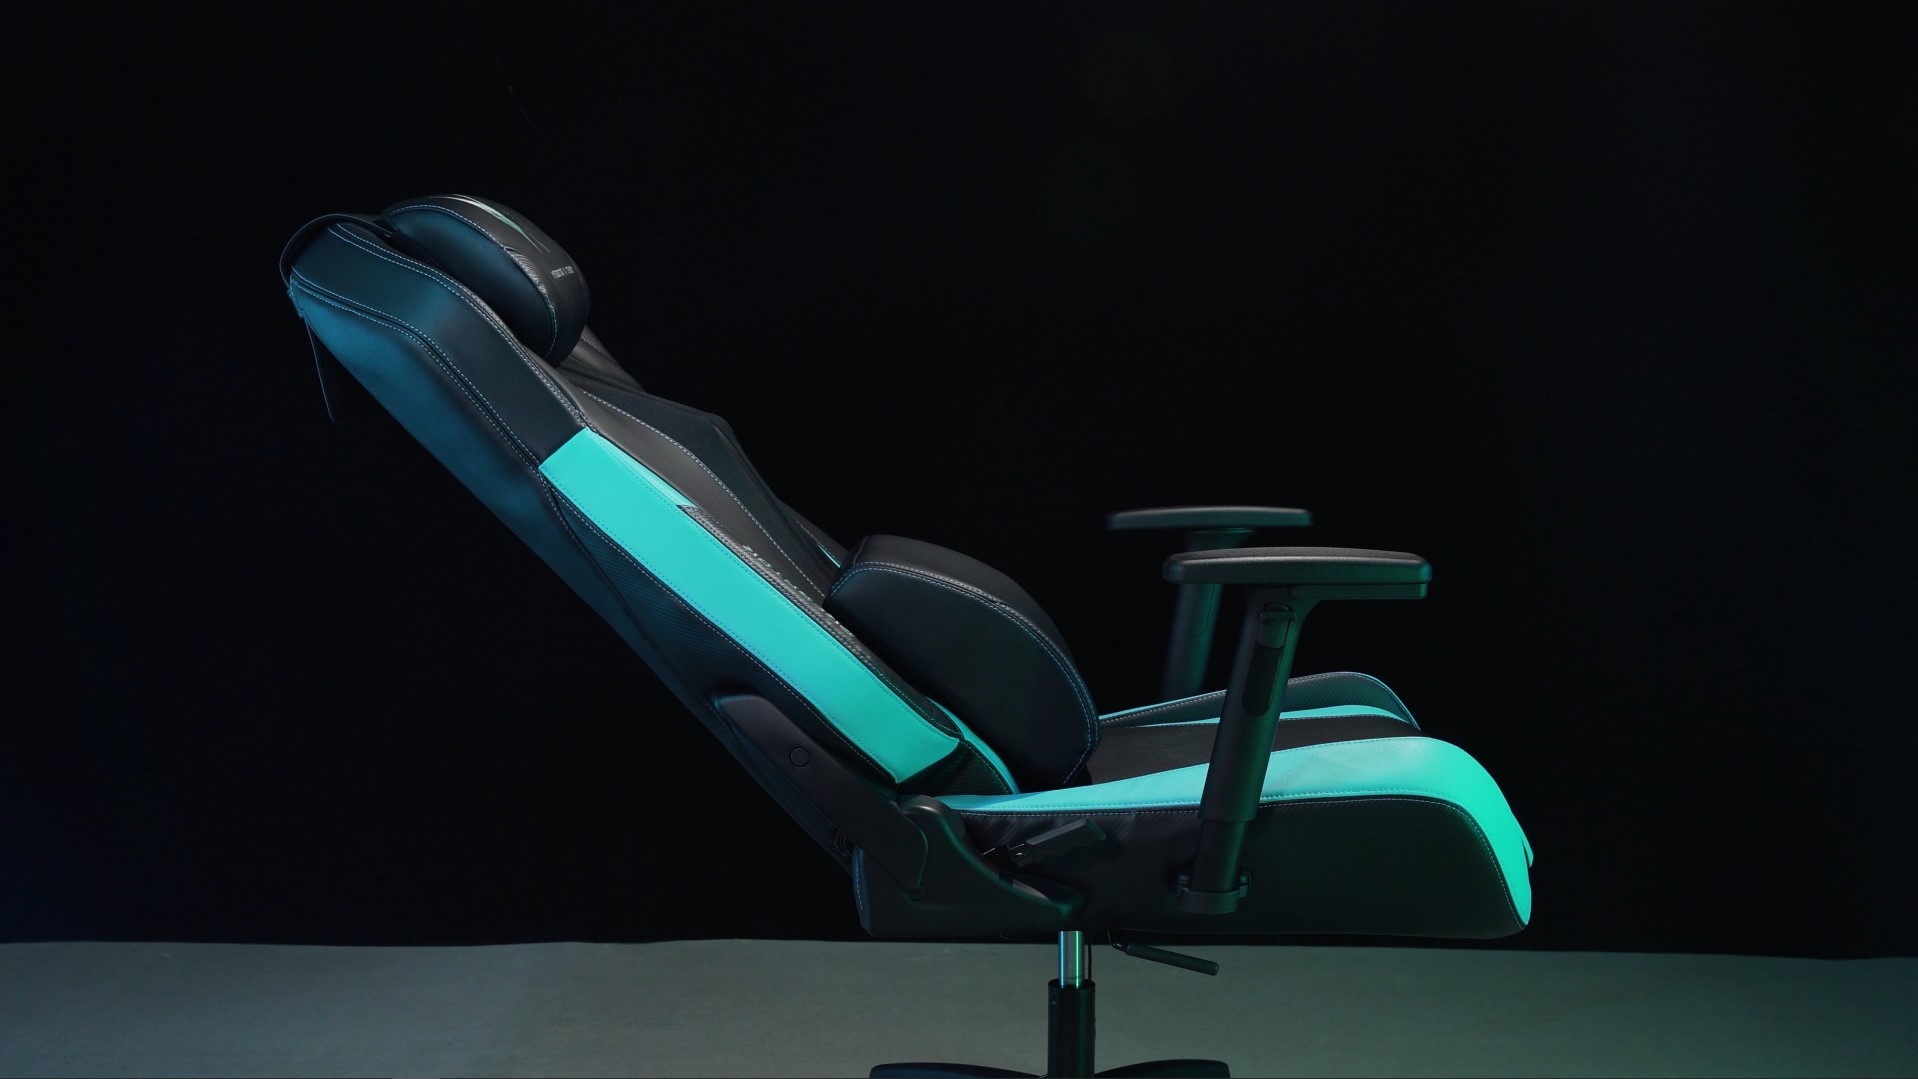  Acer  and Osim  s new Predator  gaming  chair  offers soothing 